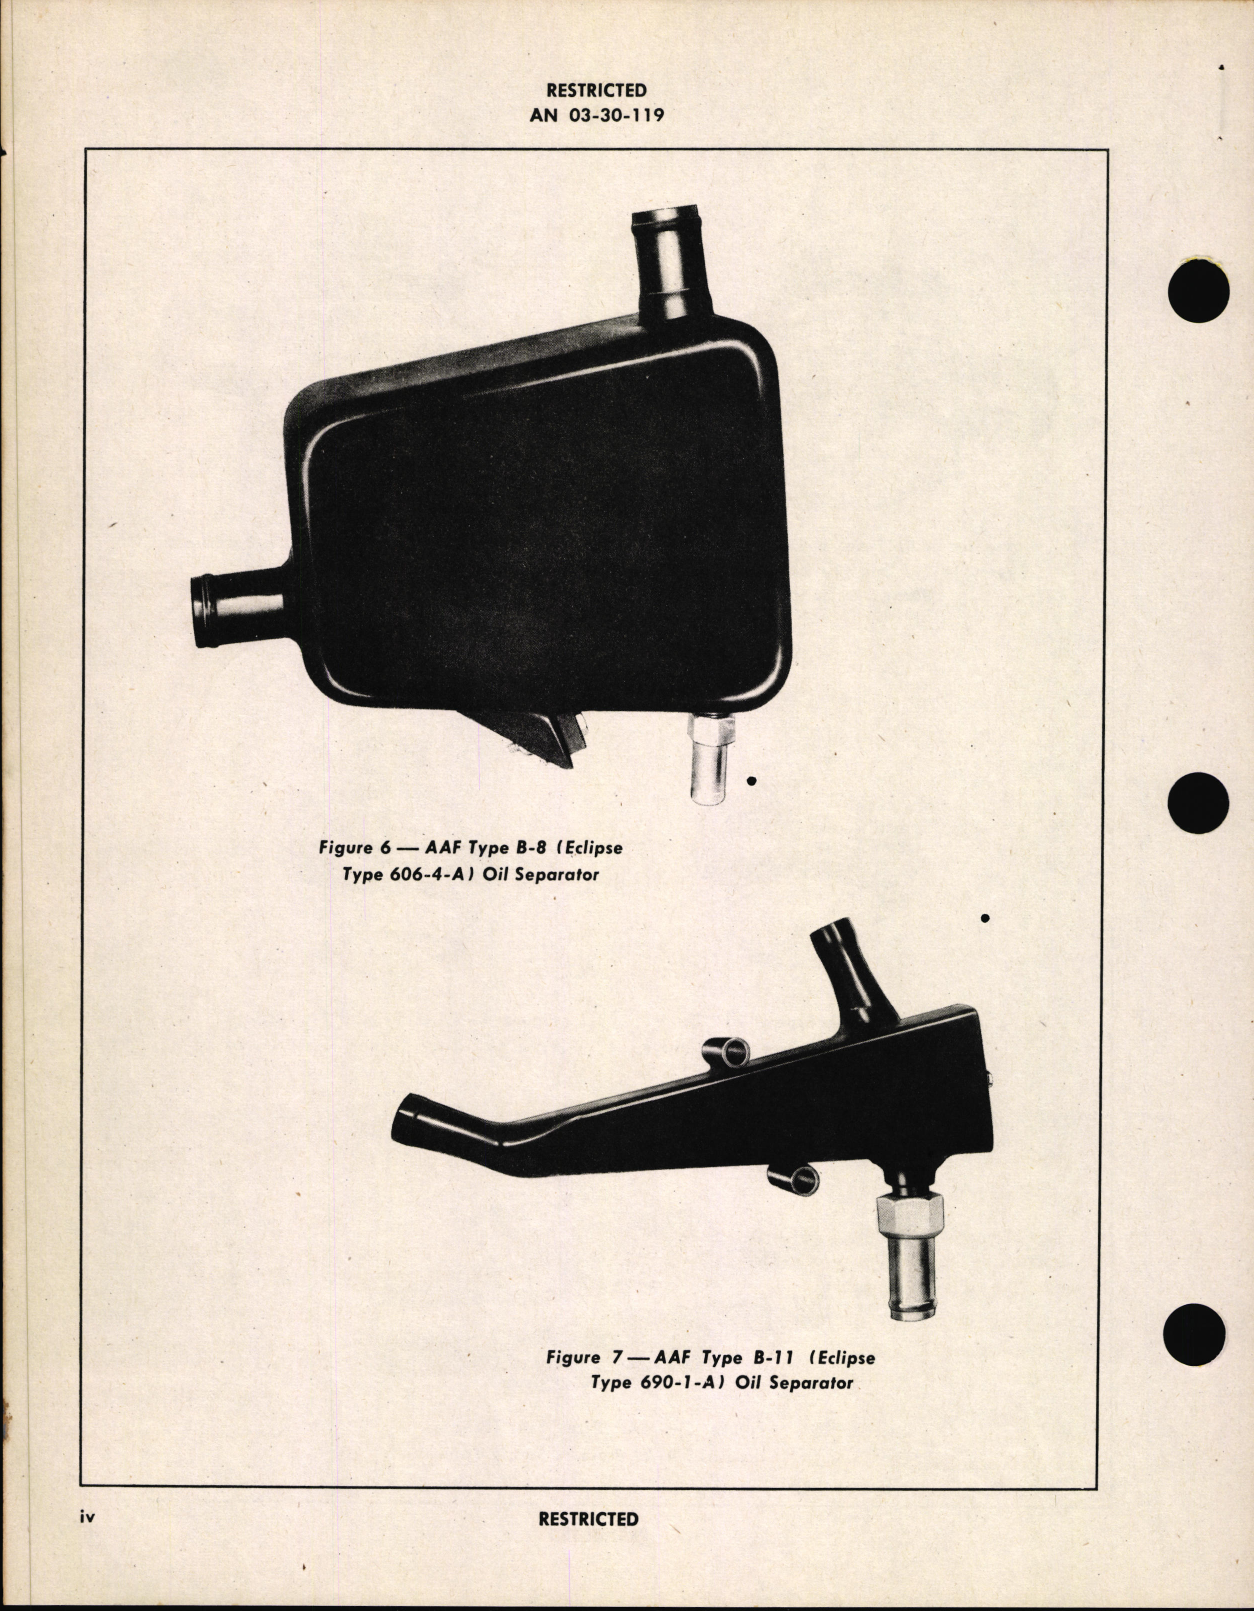 Sample page 6 from AirCorps Library document: Handbook of Instructions with Parts Catalog for Pneumatic System Valves